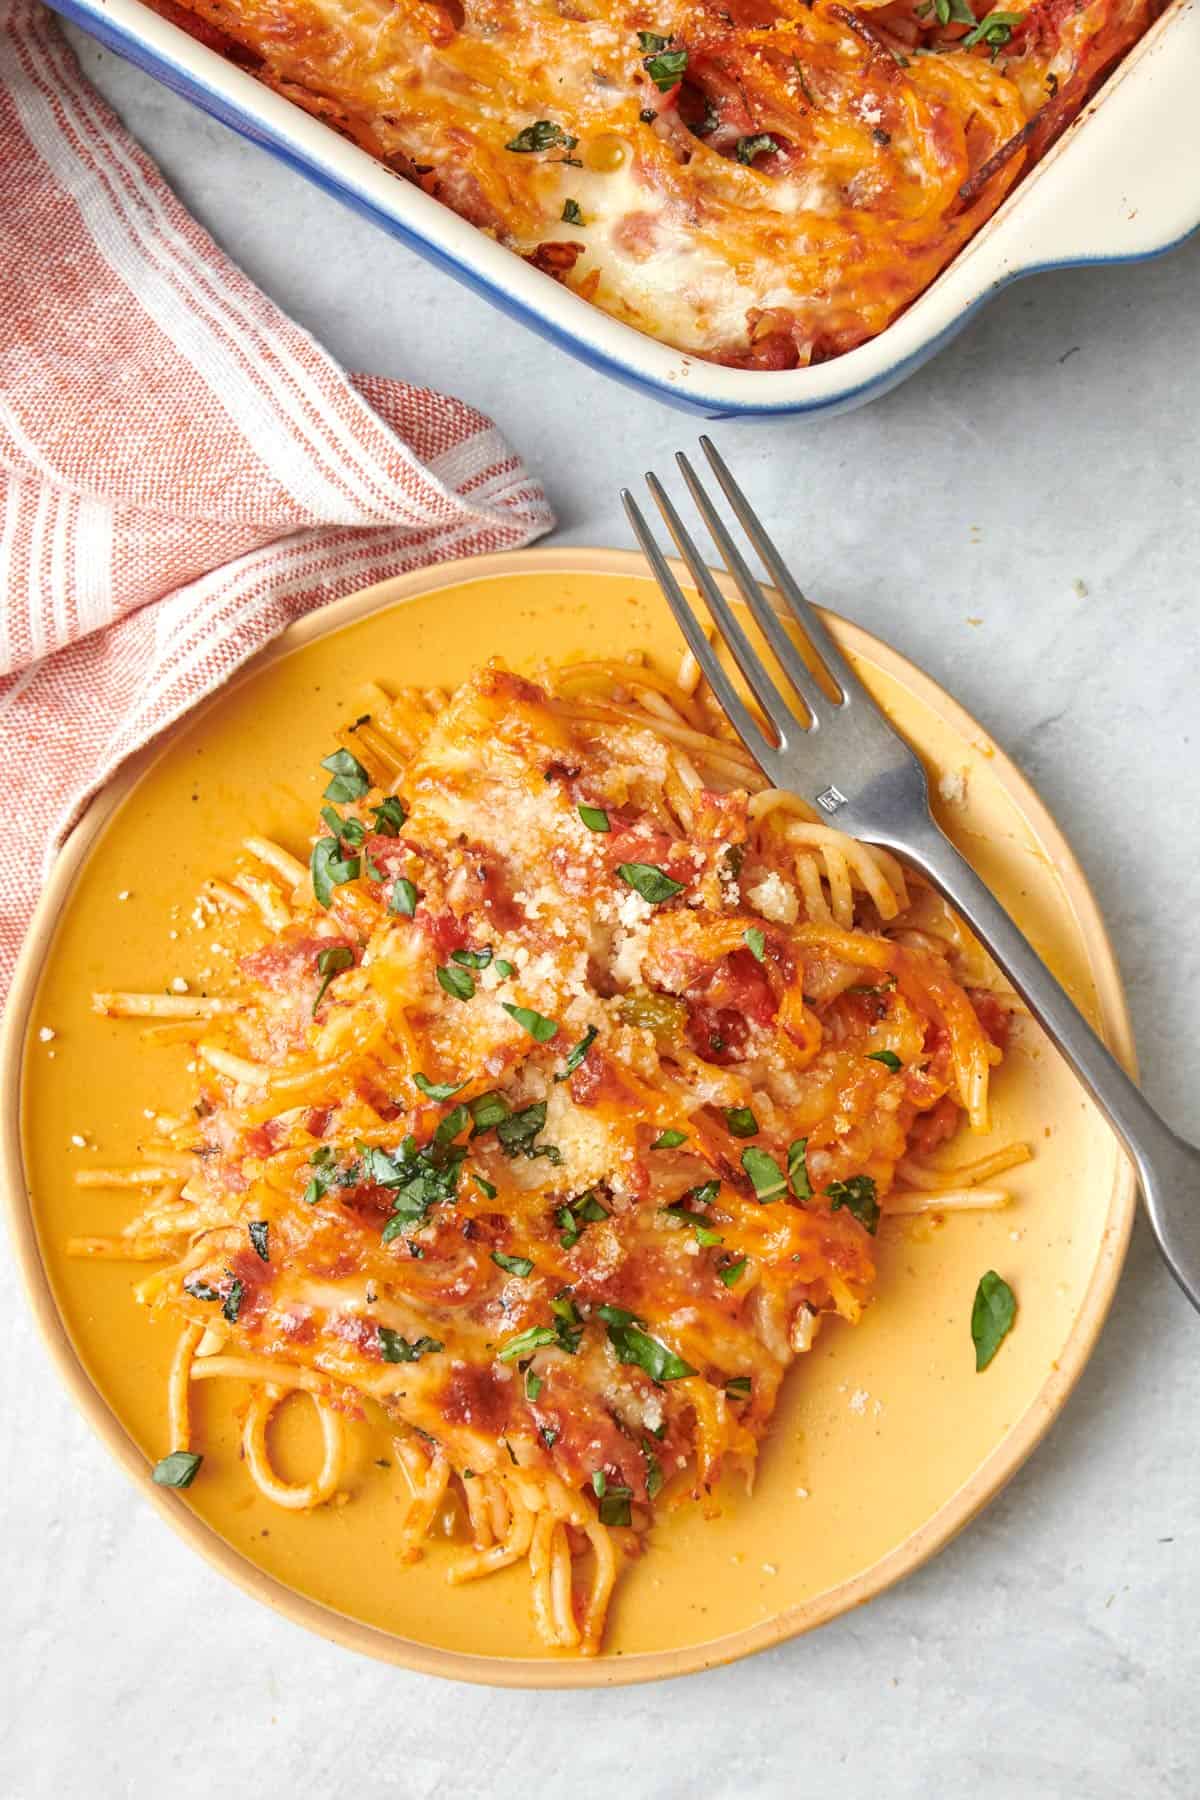 Two bowls of easy baked spaghetti topped with basil leaves